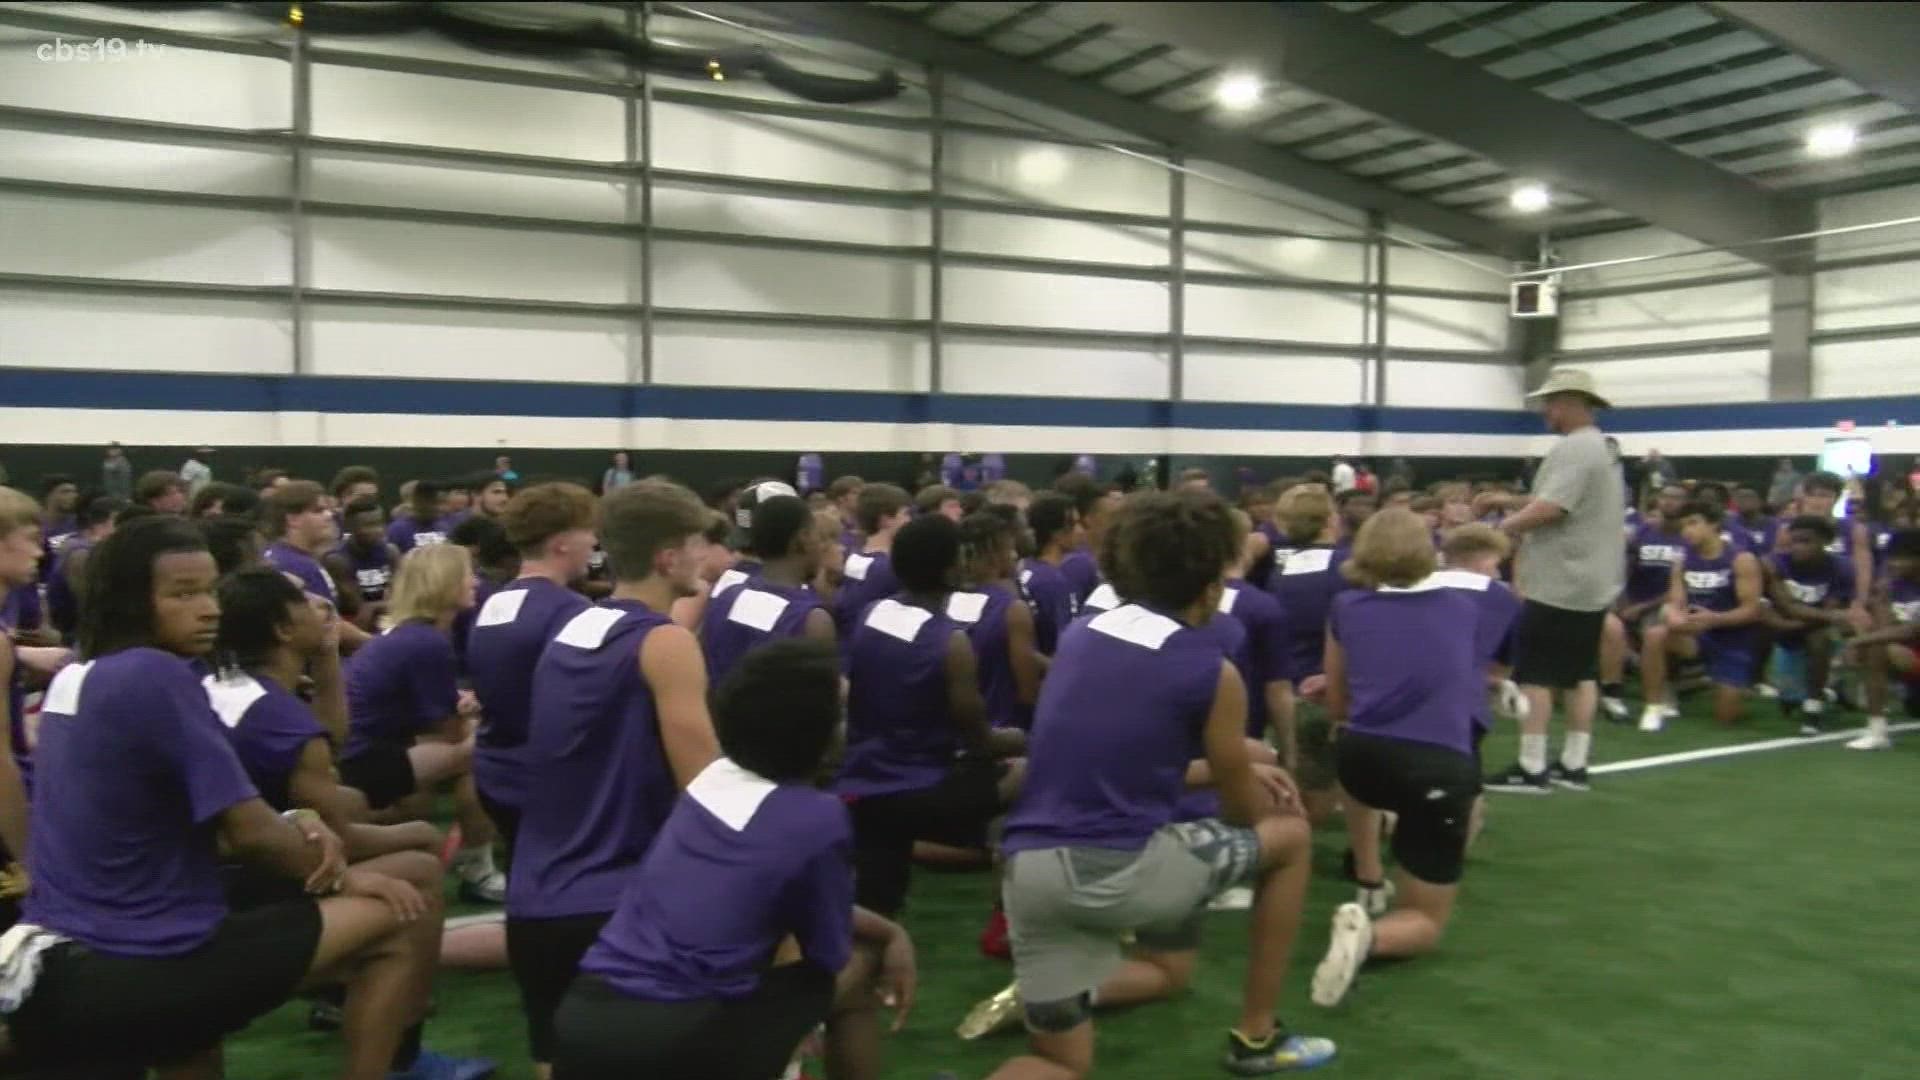 SFA opened the summer by bringing their first camp this season to East Texas.